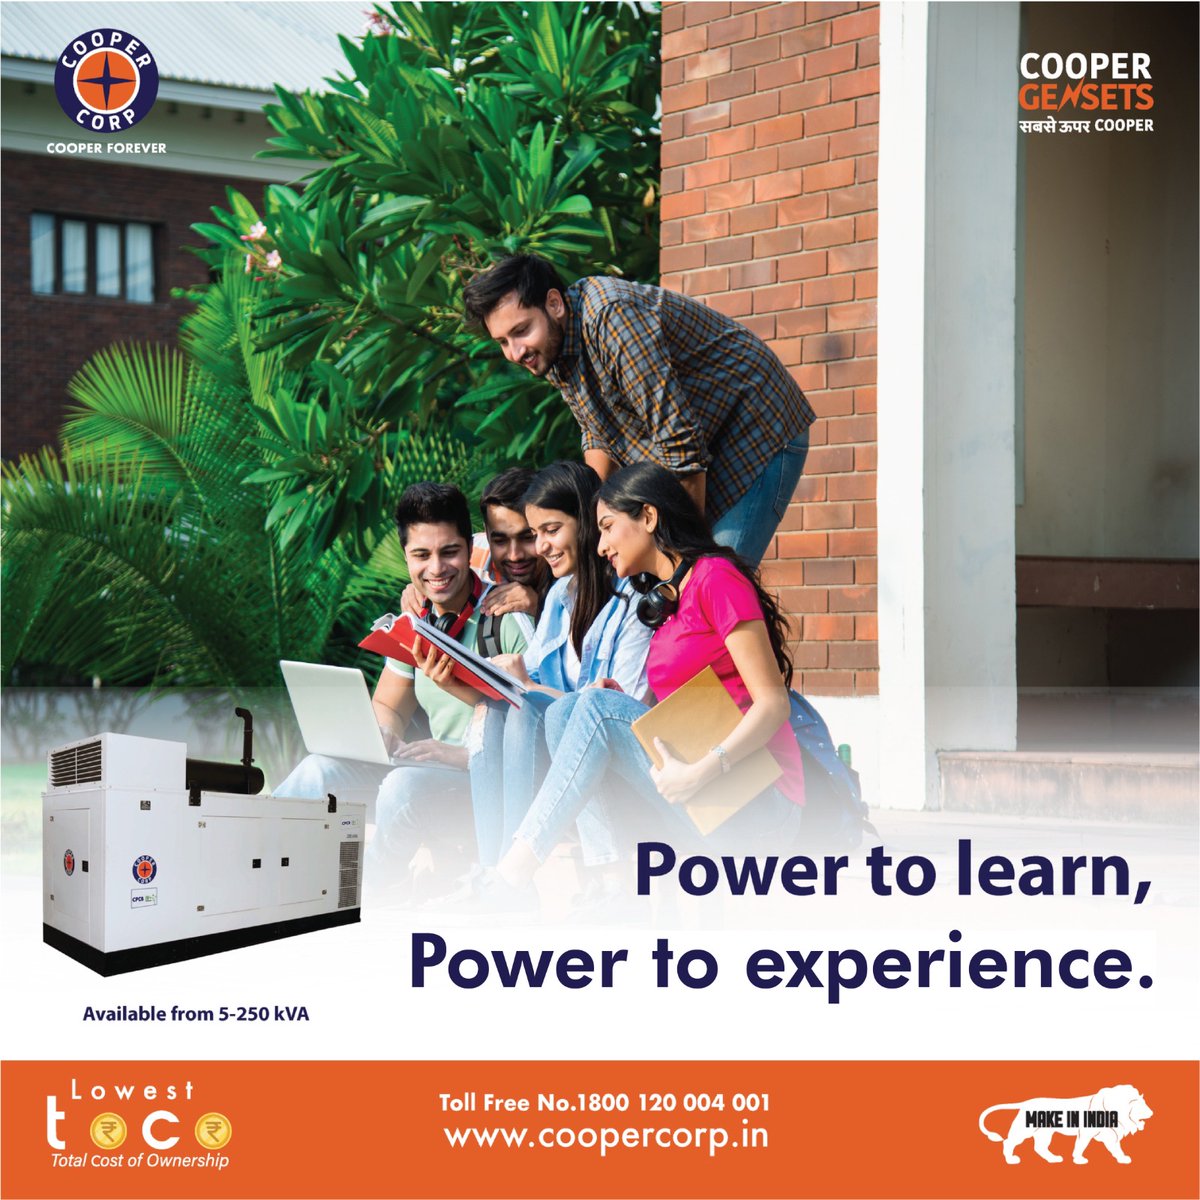 Harness the strength within, Copper Gensets embracing the power to learn and experience.

#sabseoopercooper
#coopergensets
#power
#learning
#uninterruptedpower